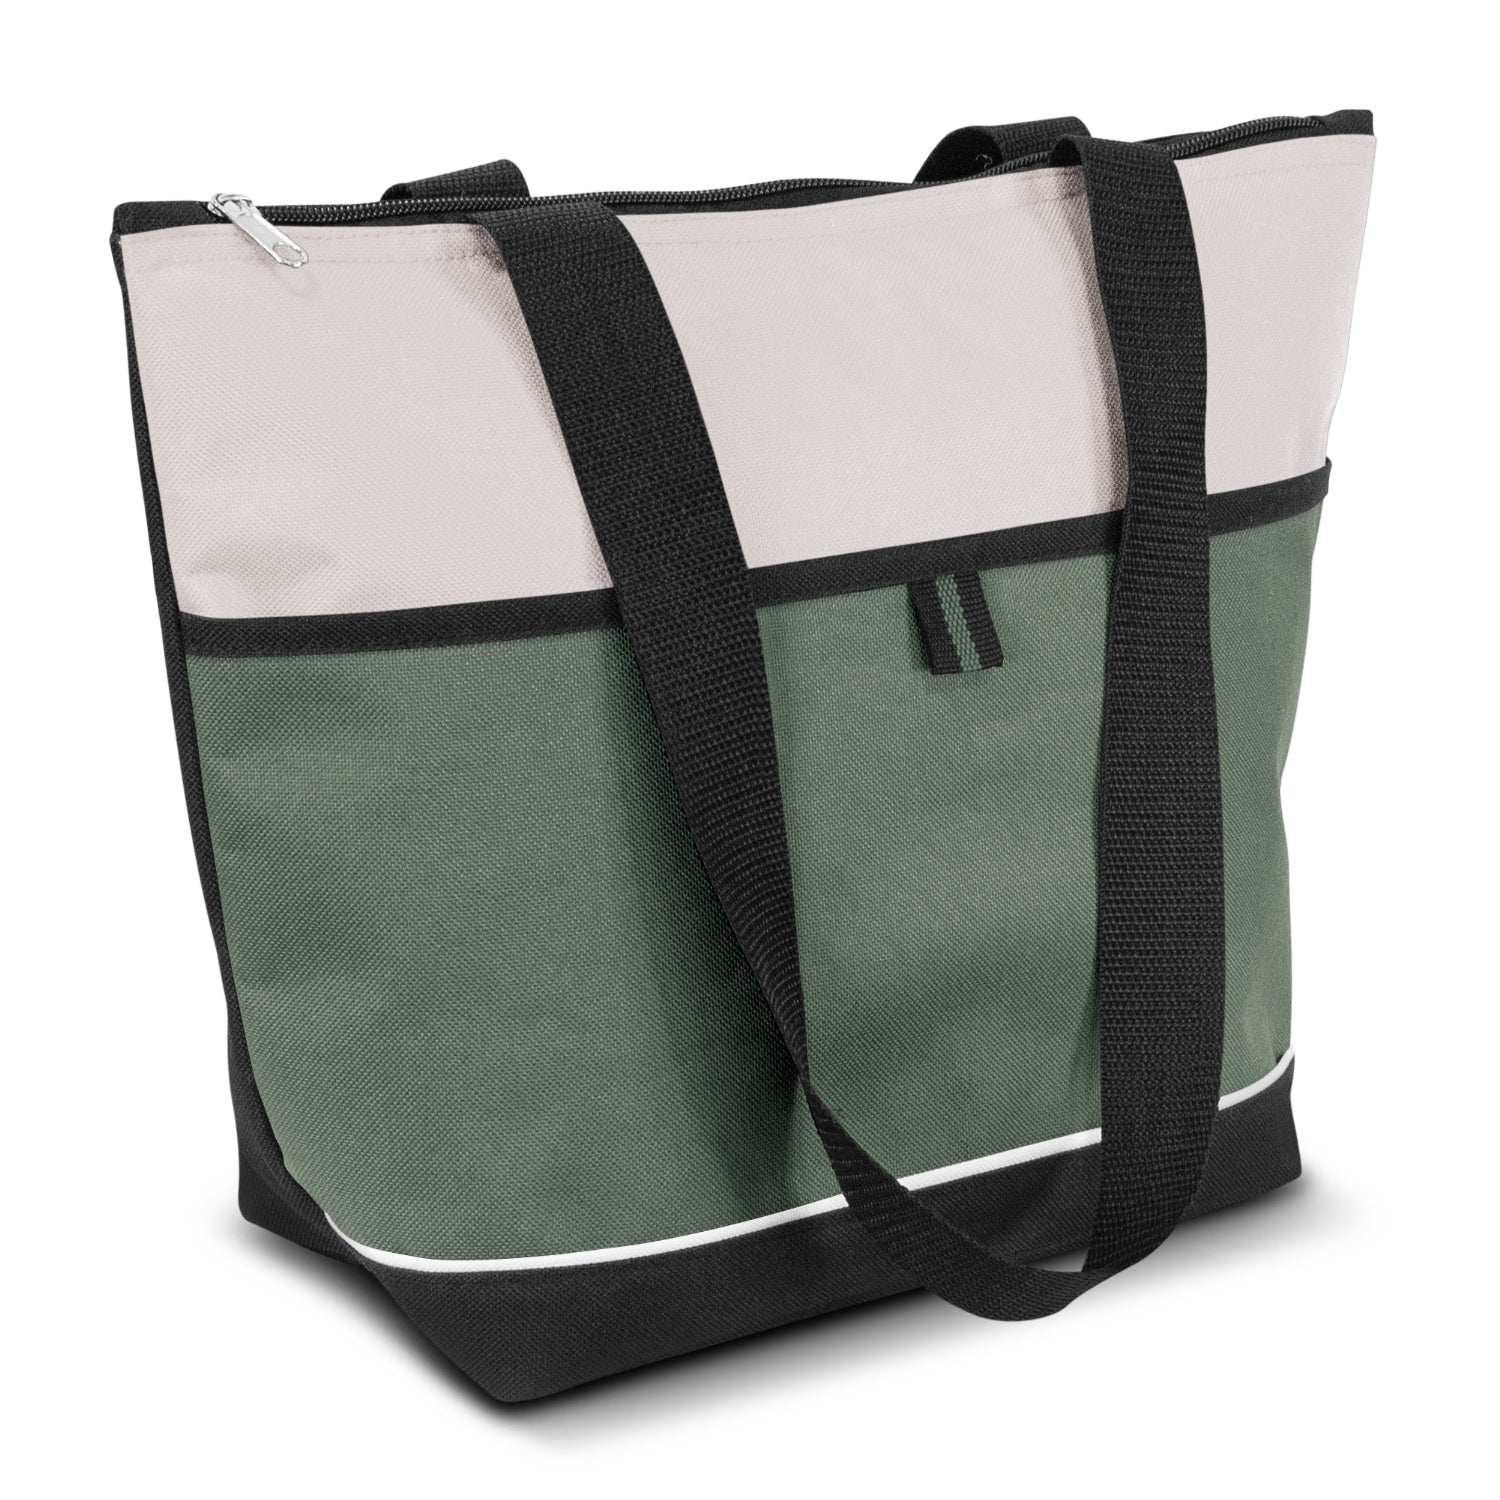 Diego Lunch Cooler Bag [115271]